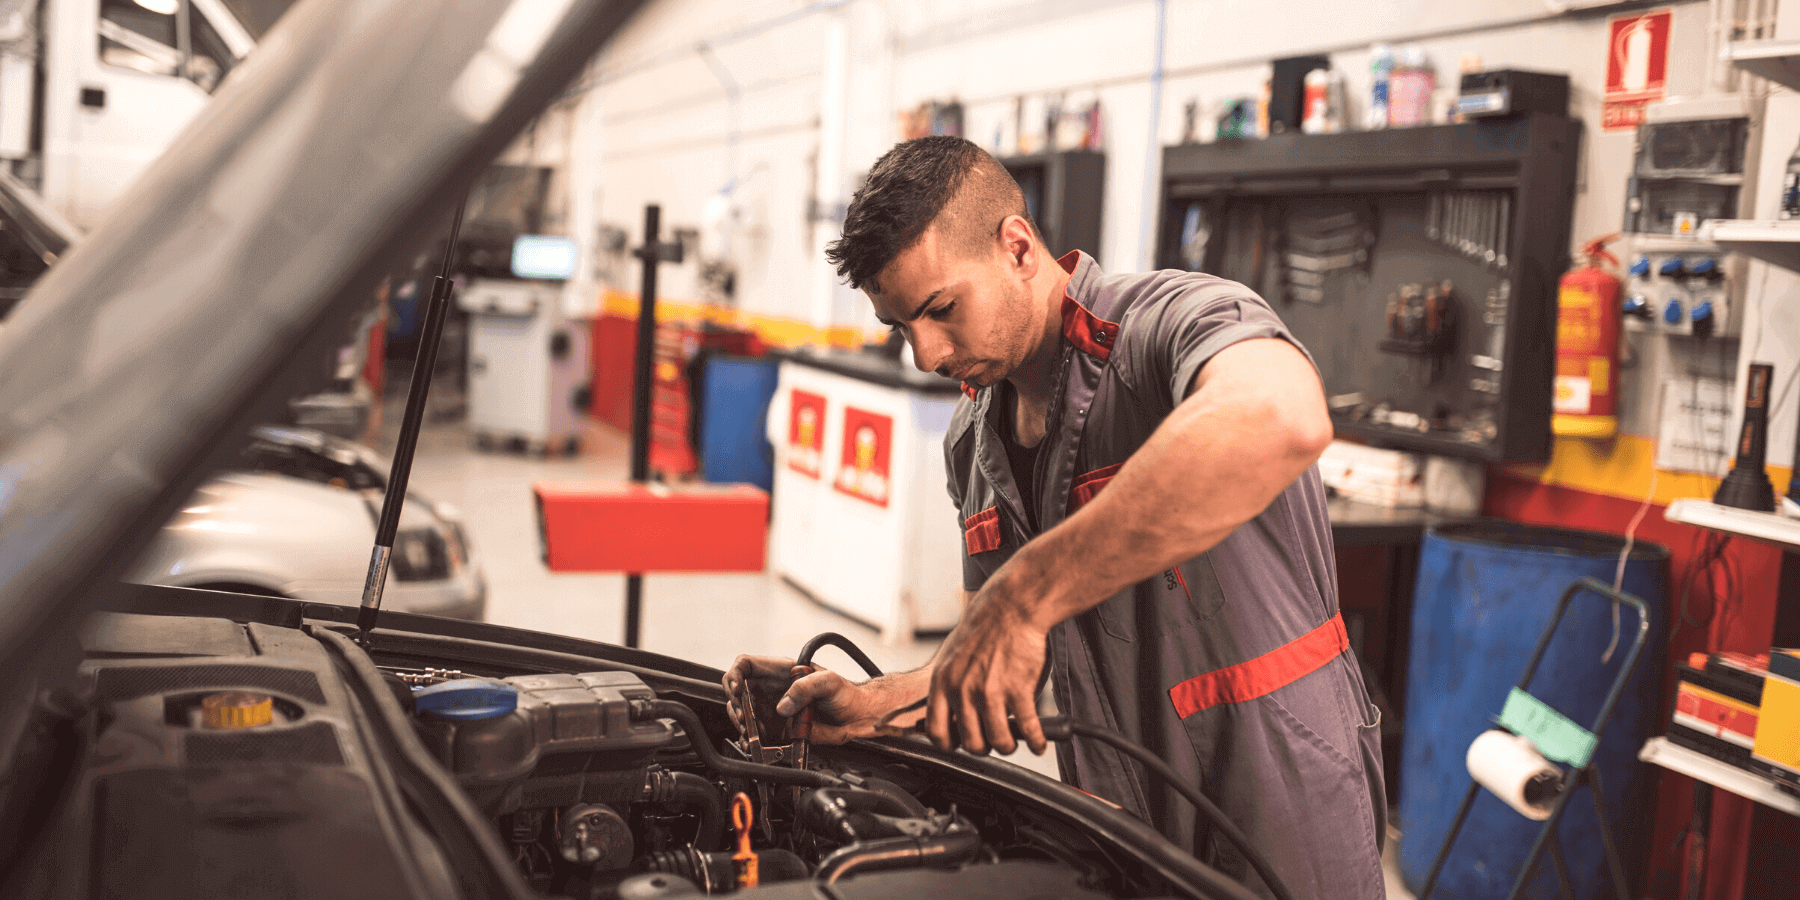 professional level services for mobile mechanics